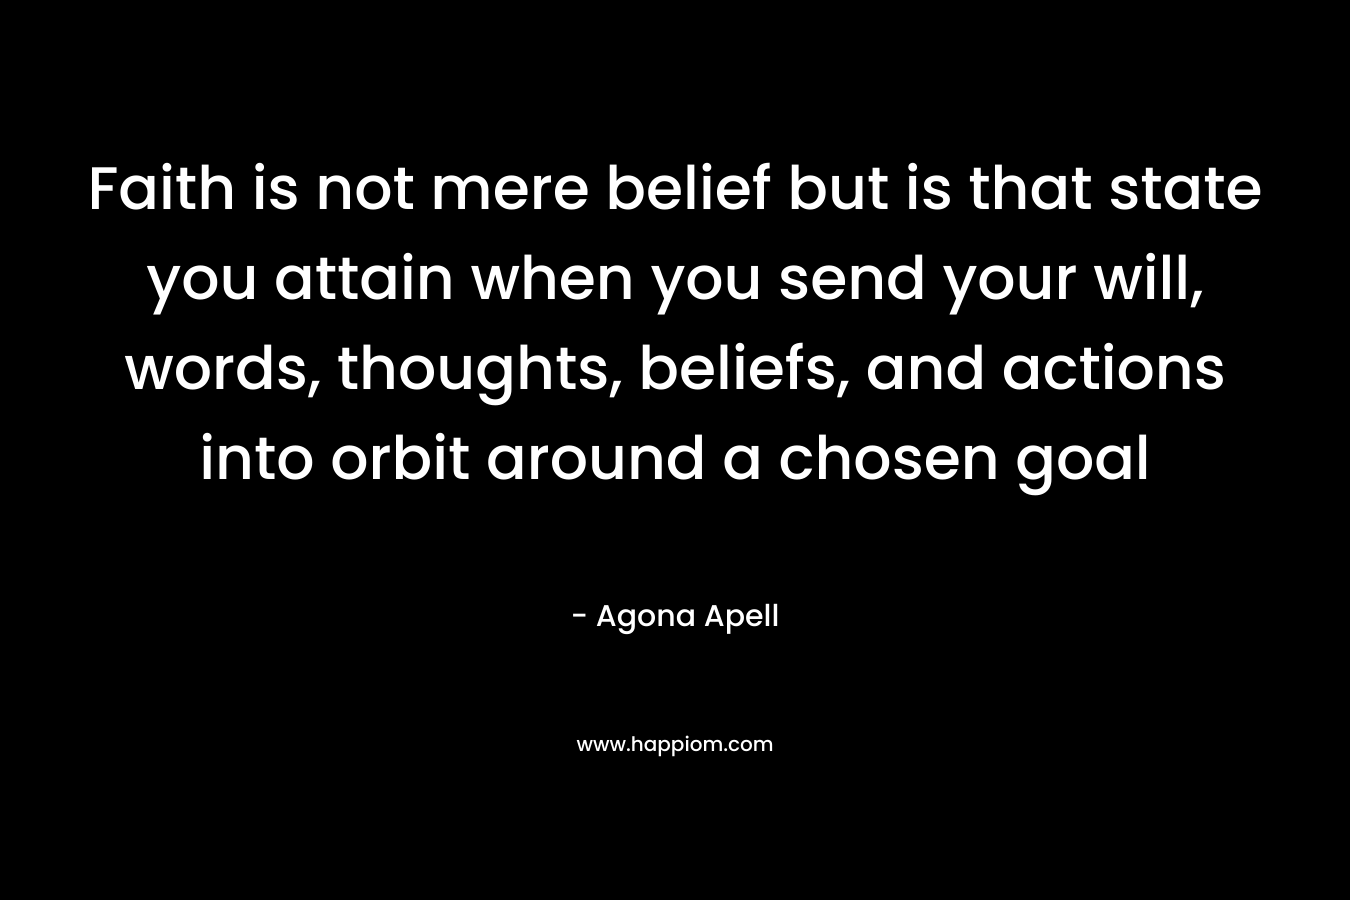 Faith is not mere belief but is that state you attain when you send your will, words, thoughts, beliefs, and actions into orbit around a chosen goal – Agona Apell